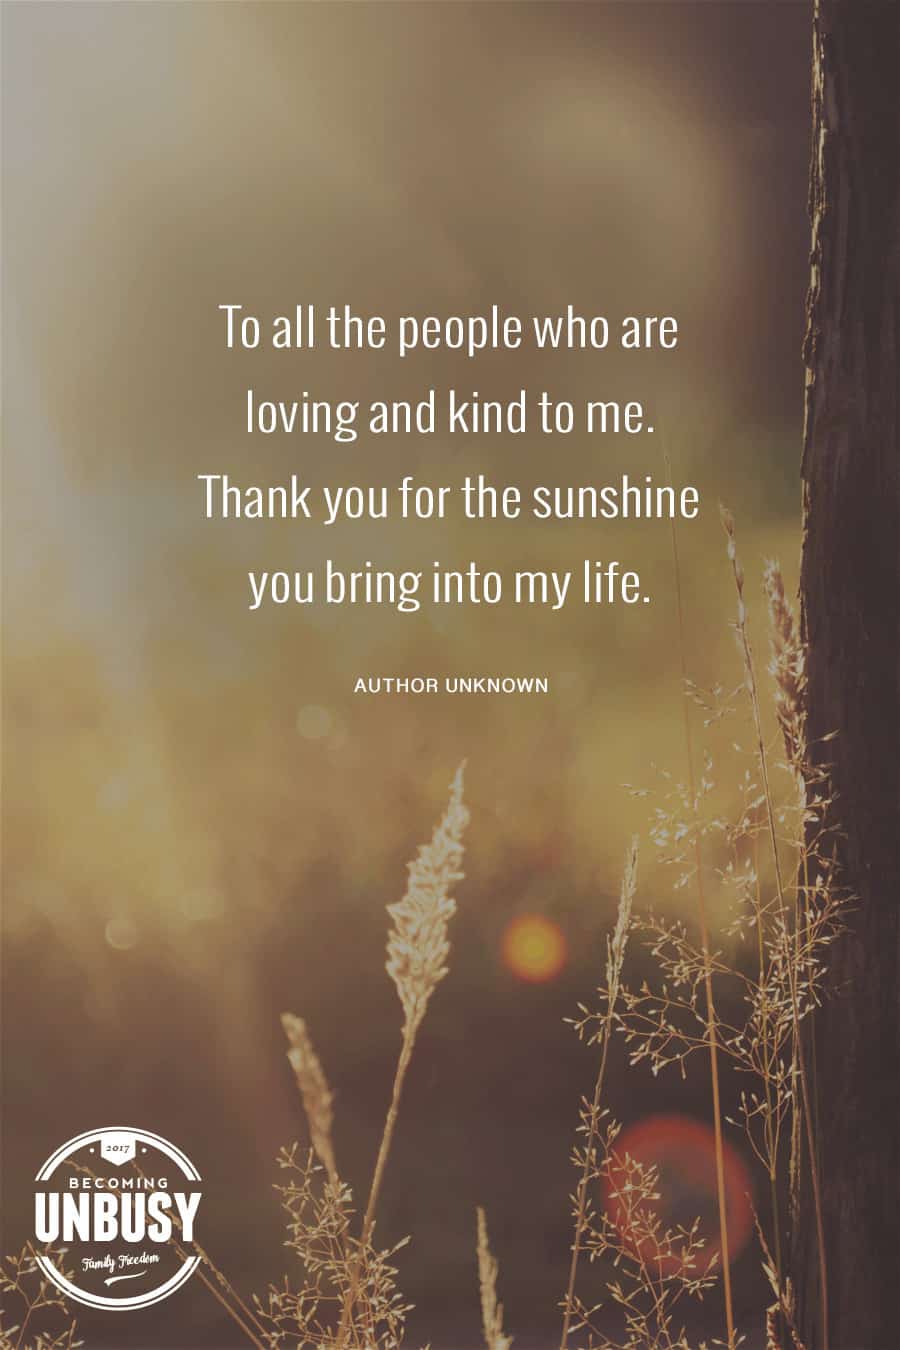 To all the people who are loving and kind to me. Thank you for the sunshine you bring into my life. #quote *loving this entire blog post